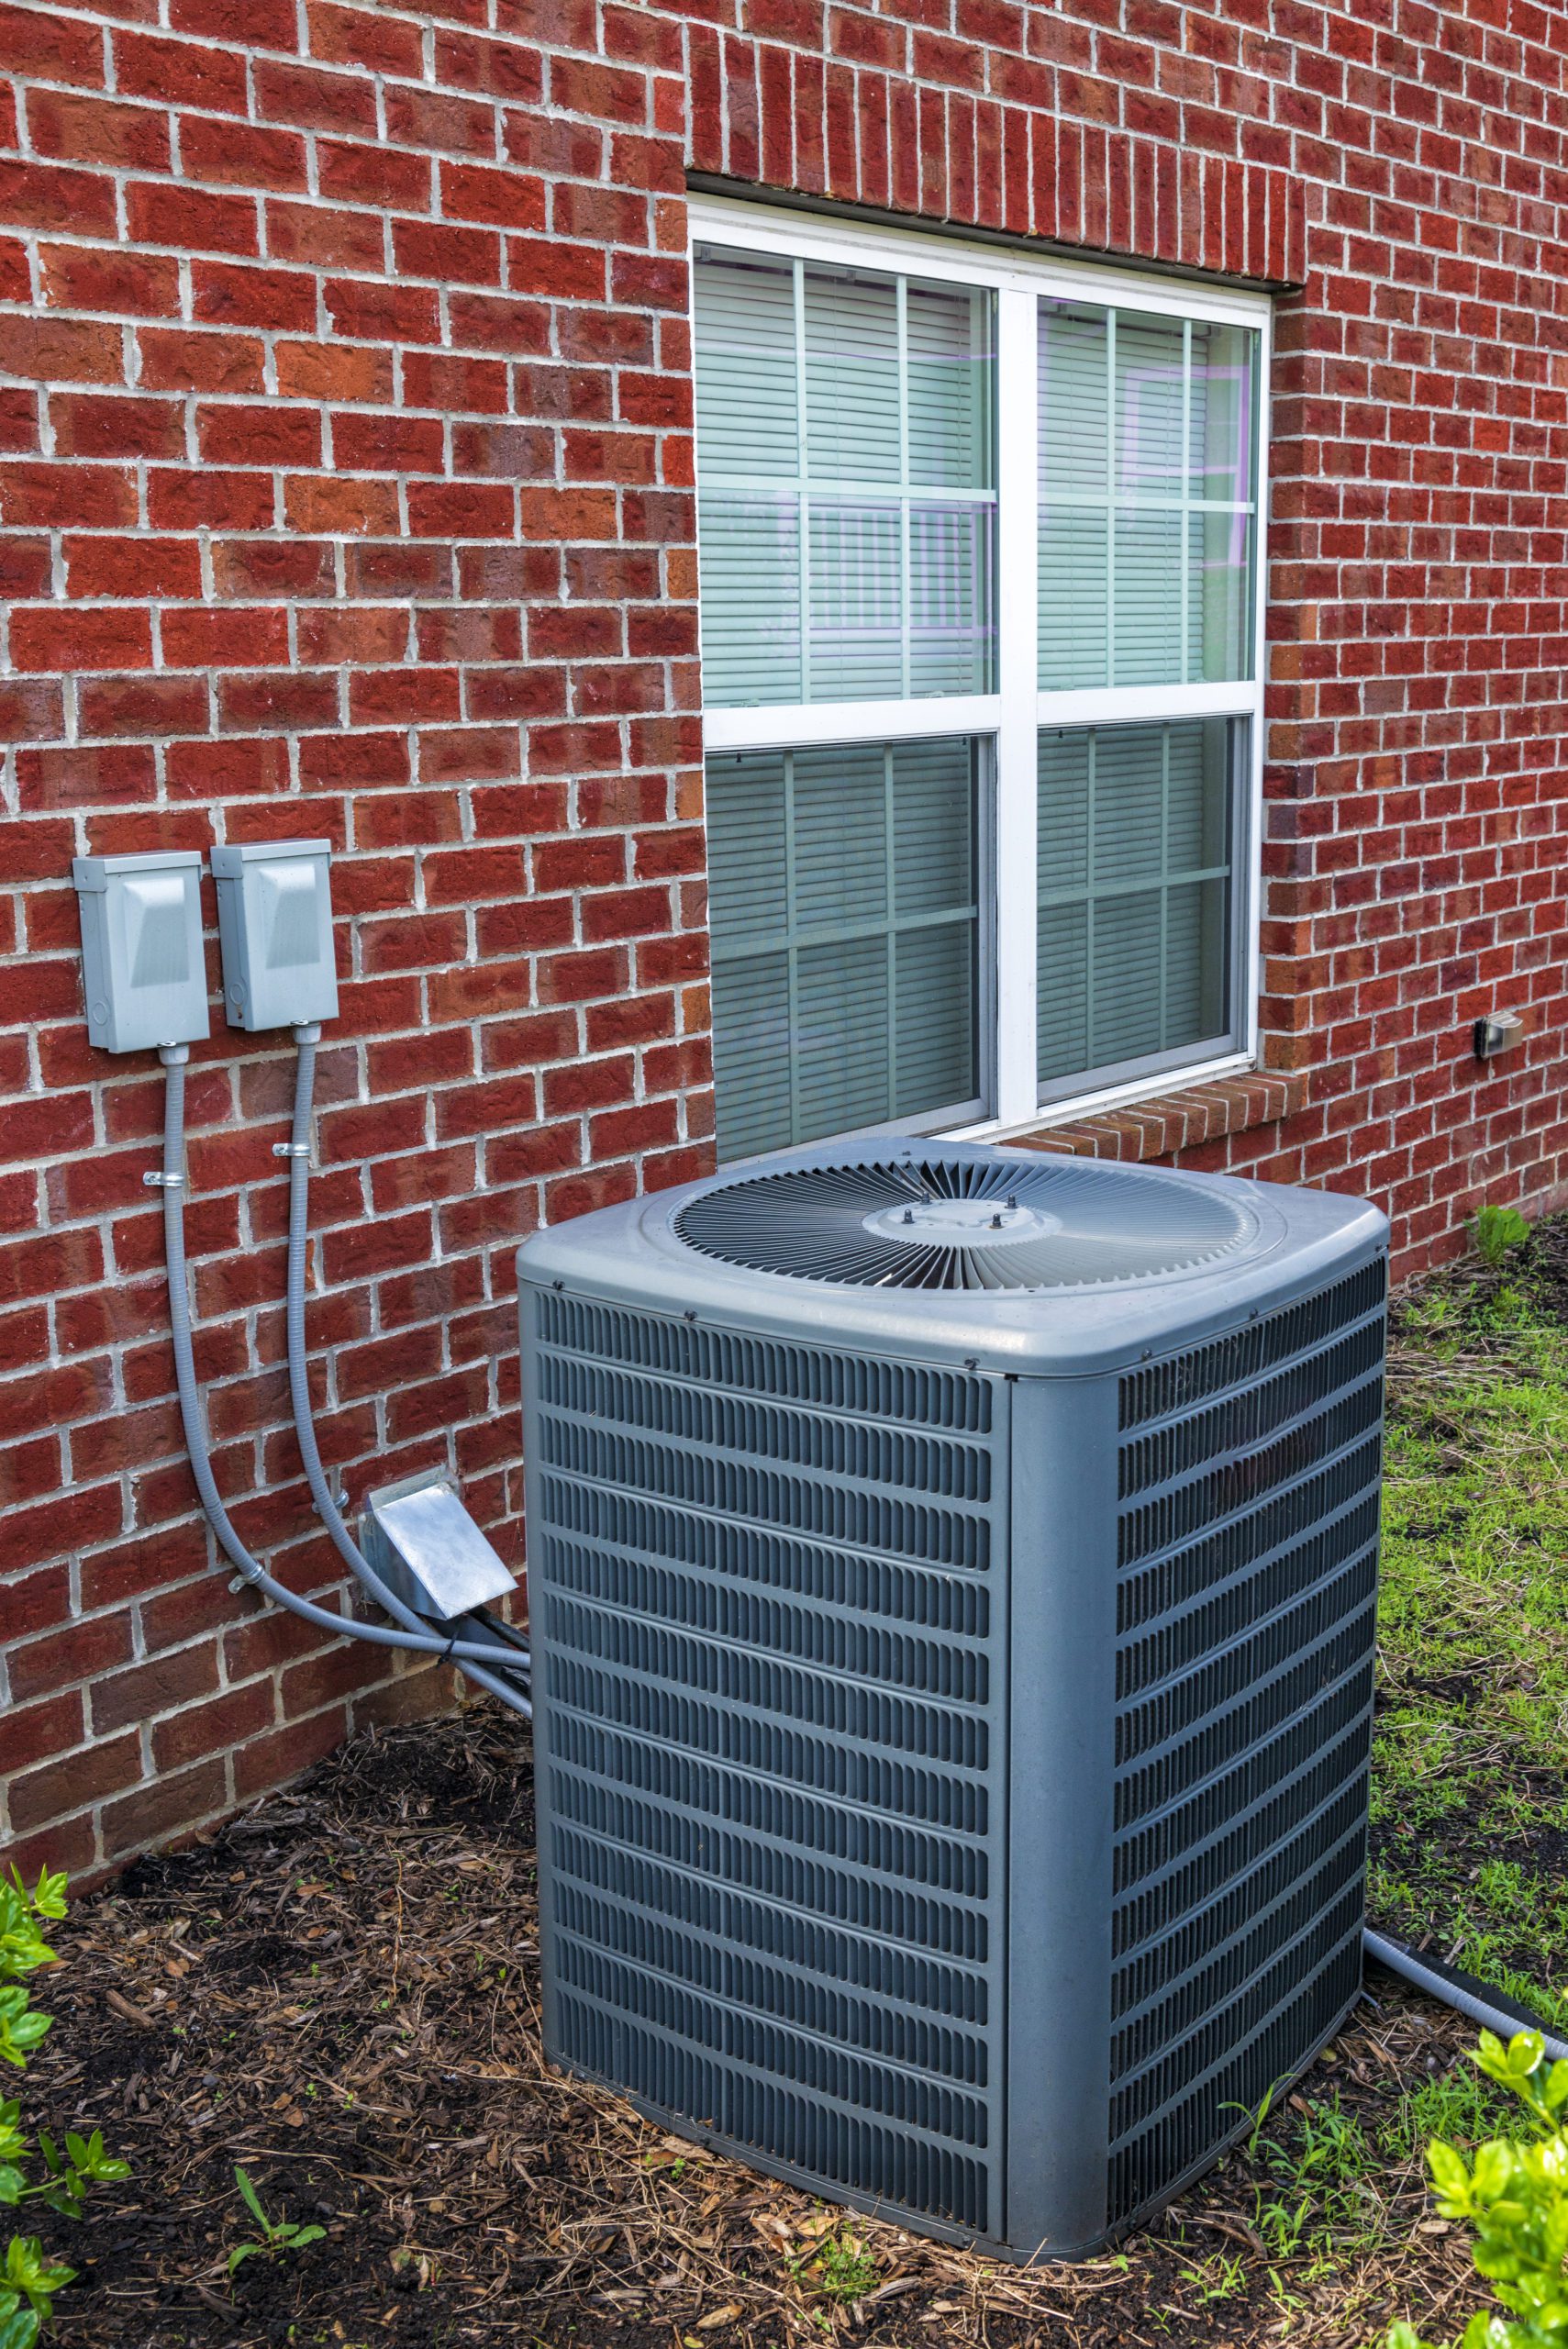 Vertical shot of an air conditioning unit for an apartment home.